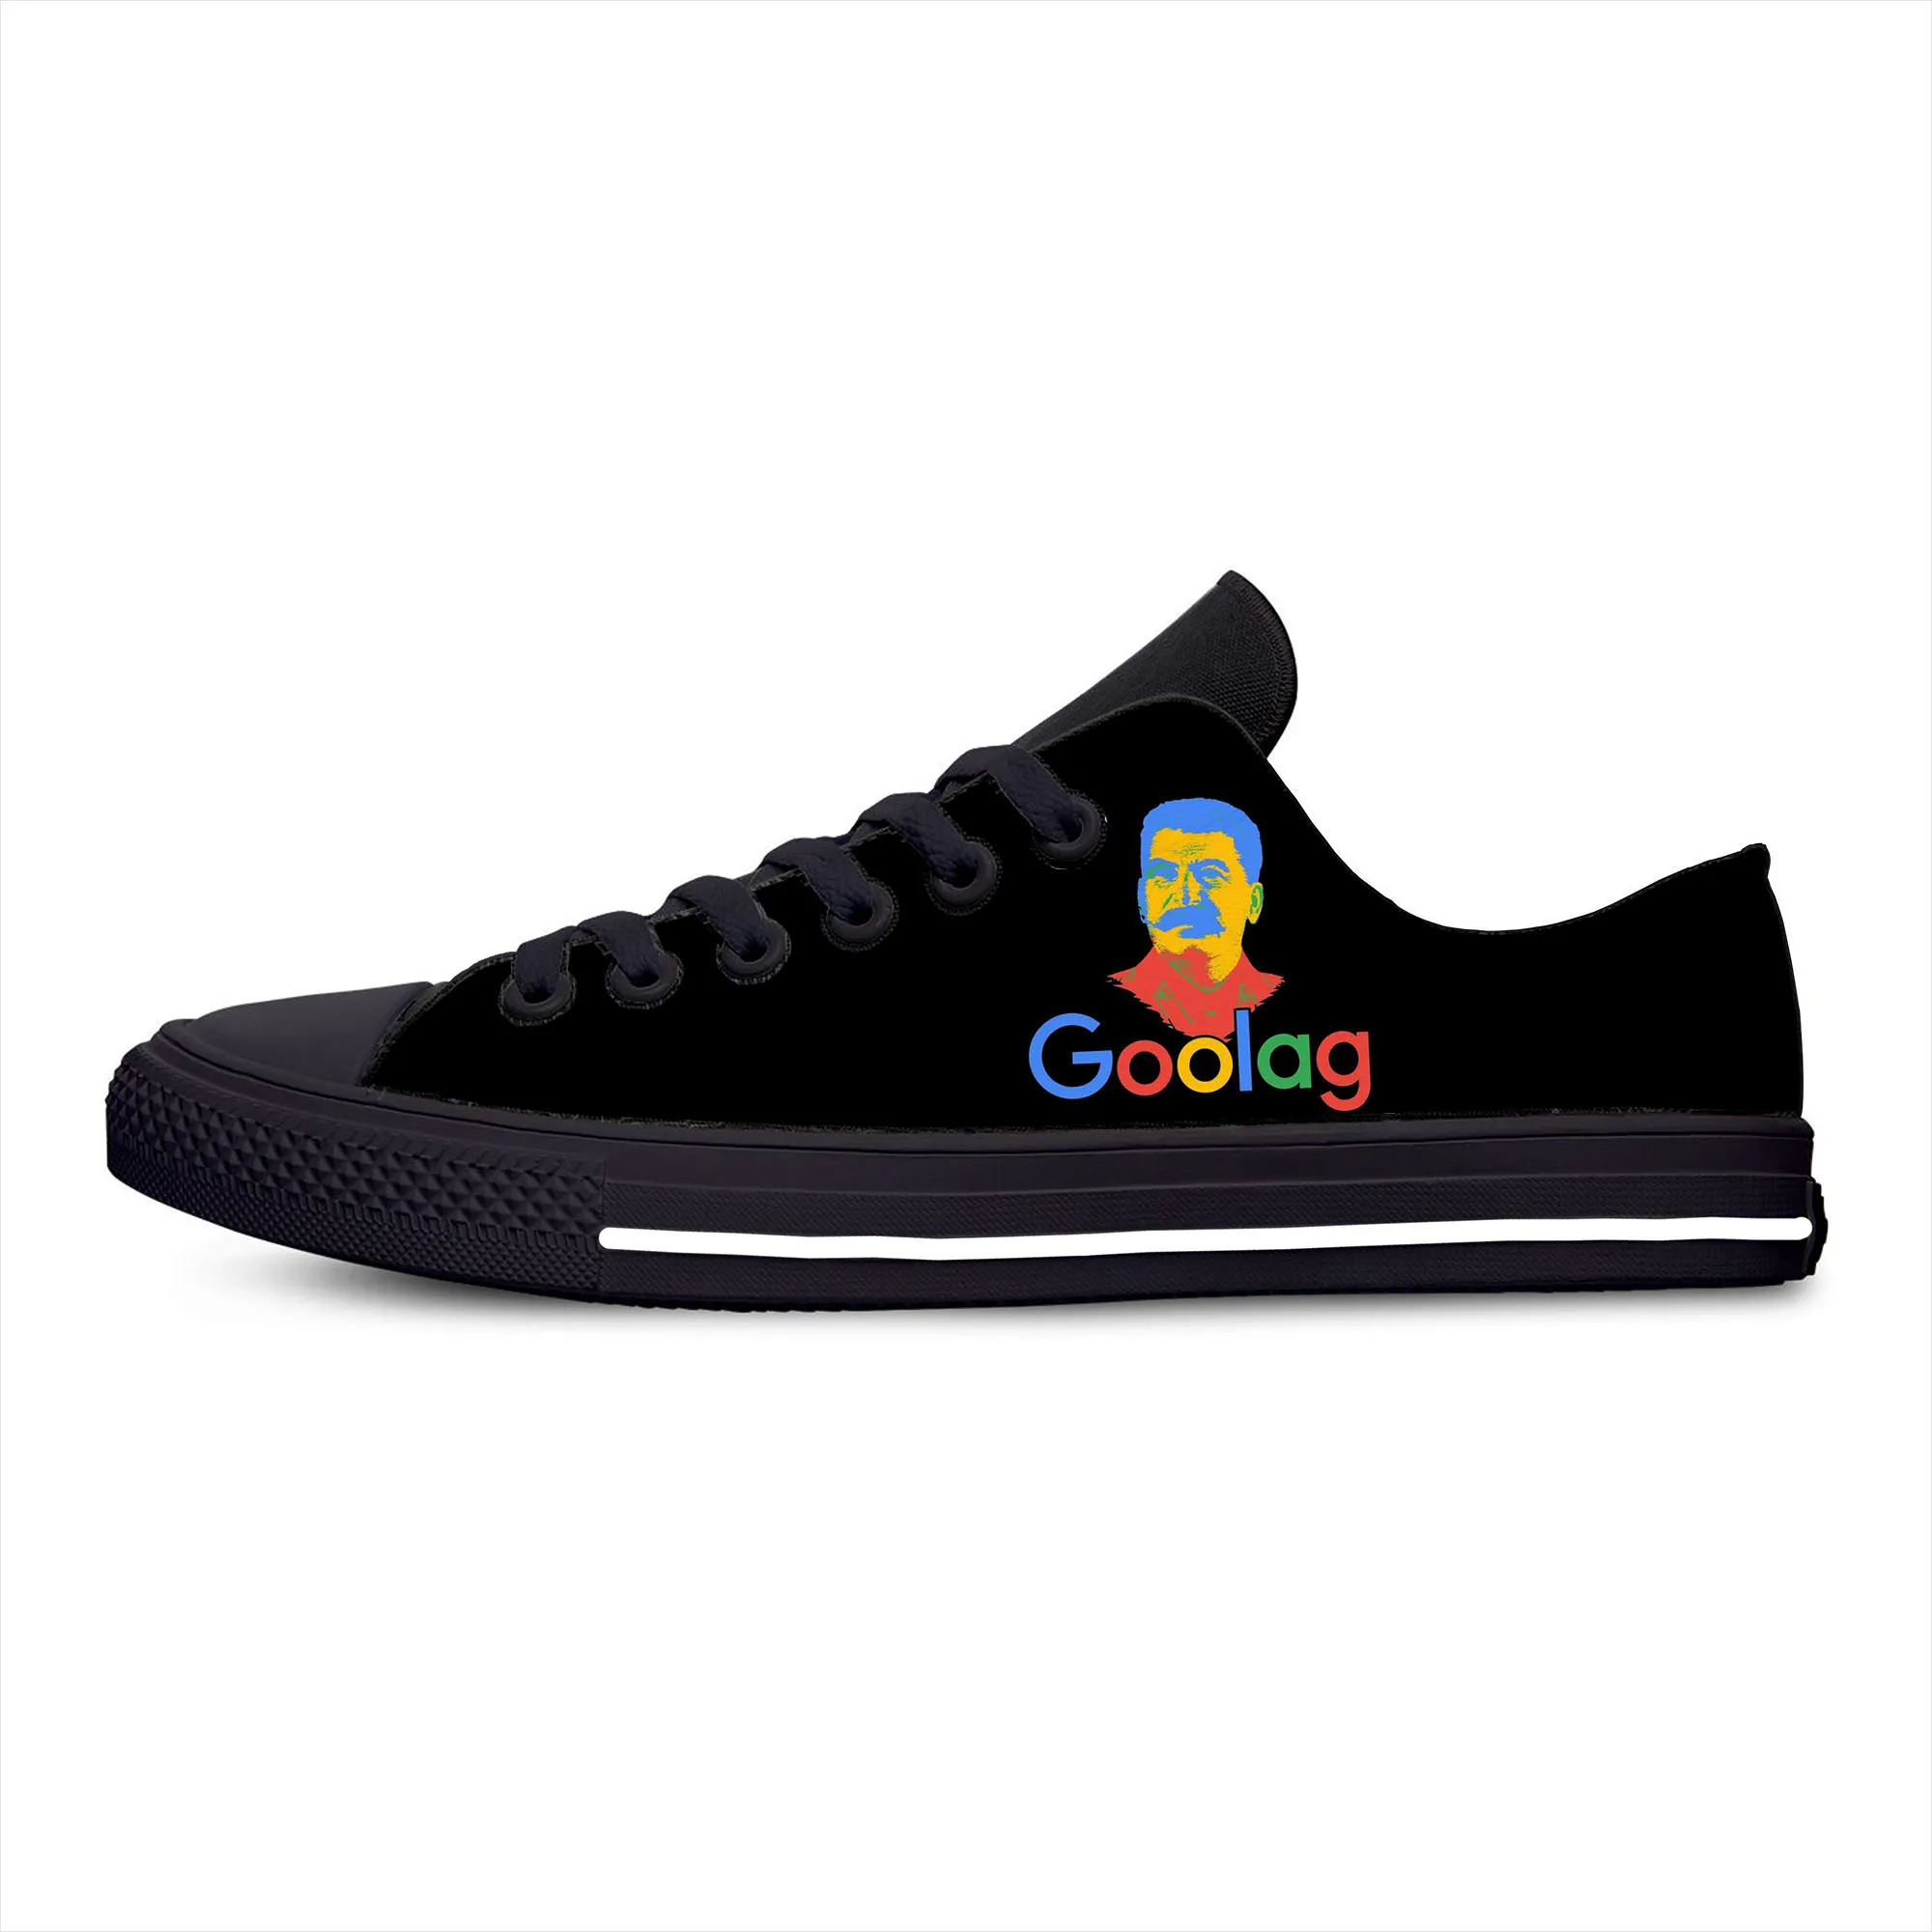 Funny Goolag Stalin Artsy Low Top Sneakers Mens Womens Teenager Casual 3D Print Shoe Canvas Running Shoes Lightweight shoe